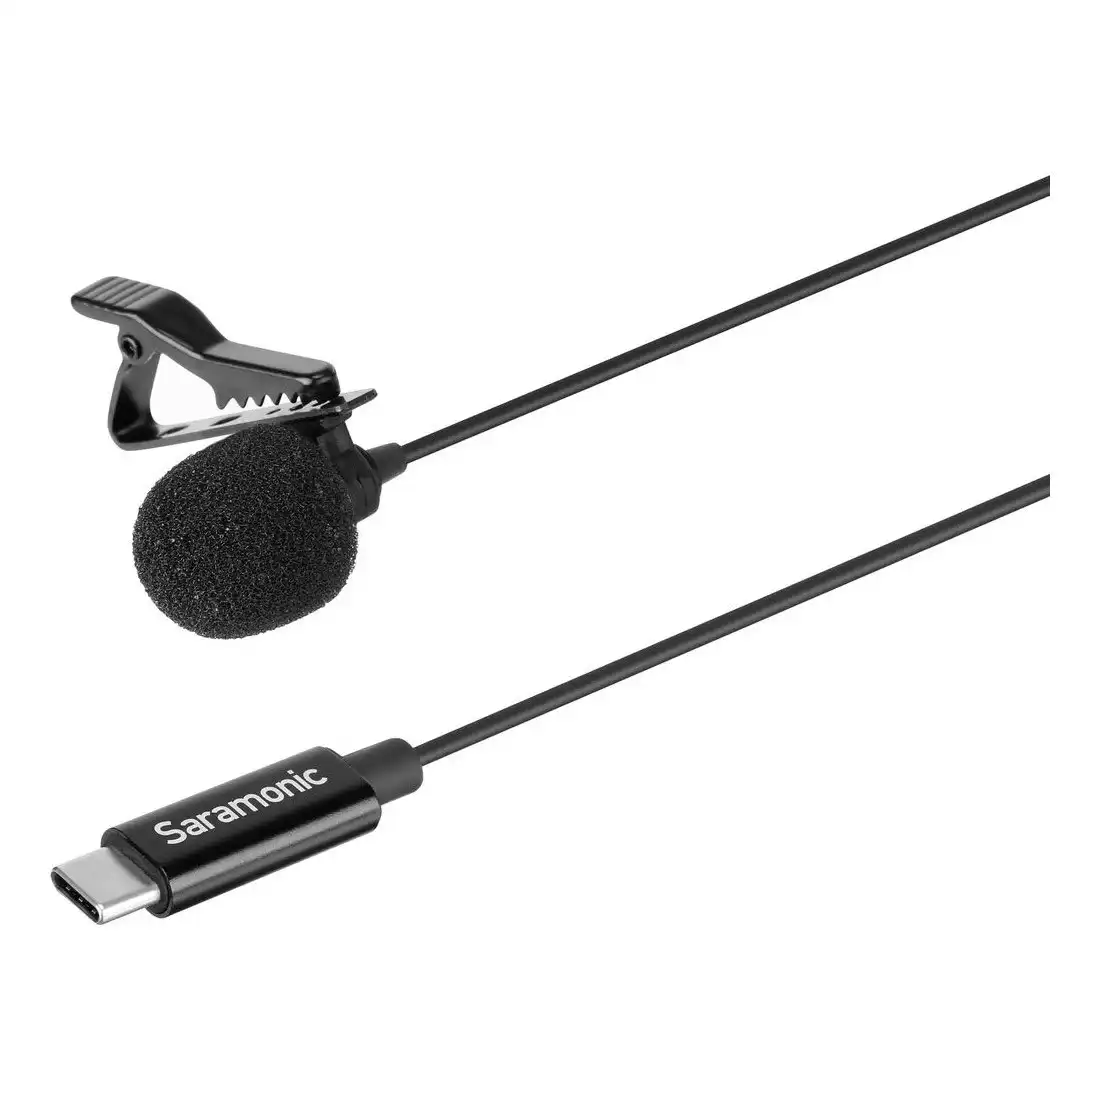 Saramonic LavMicro U3A Omnidirectional Clip-on Lavalier Microphone with USB Type-C Connector